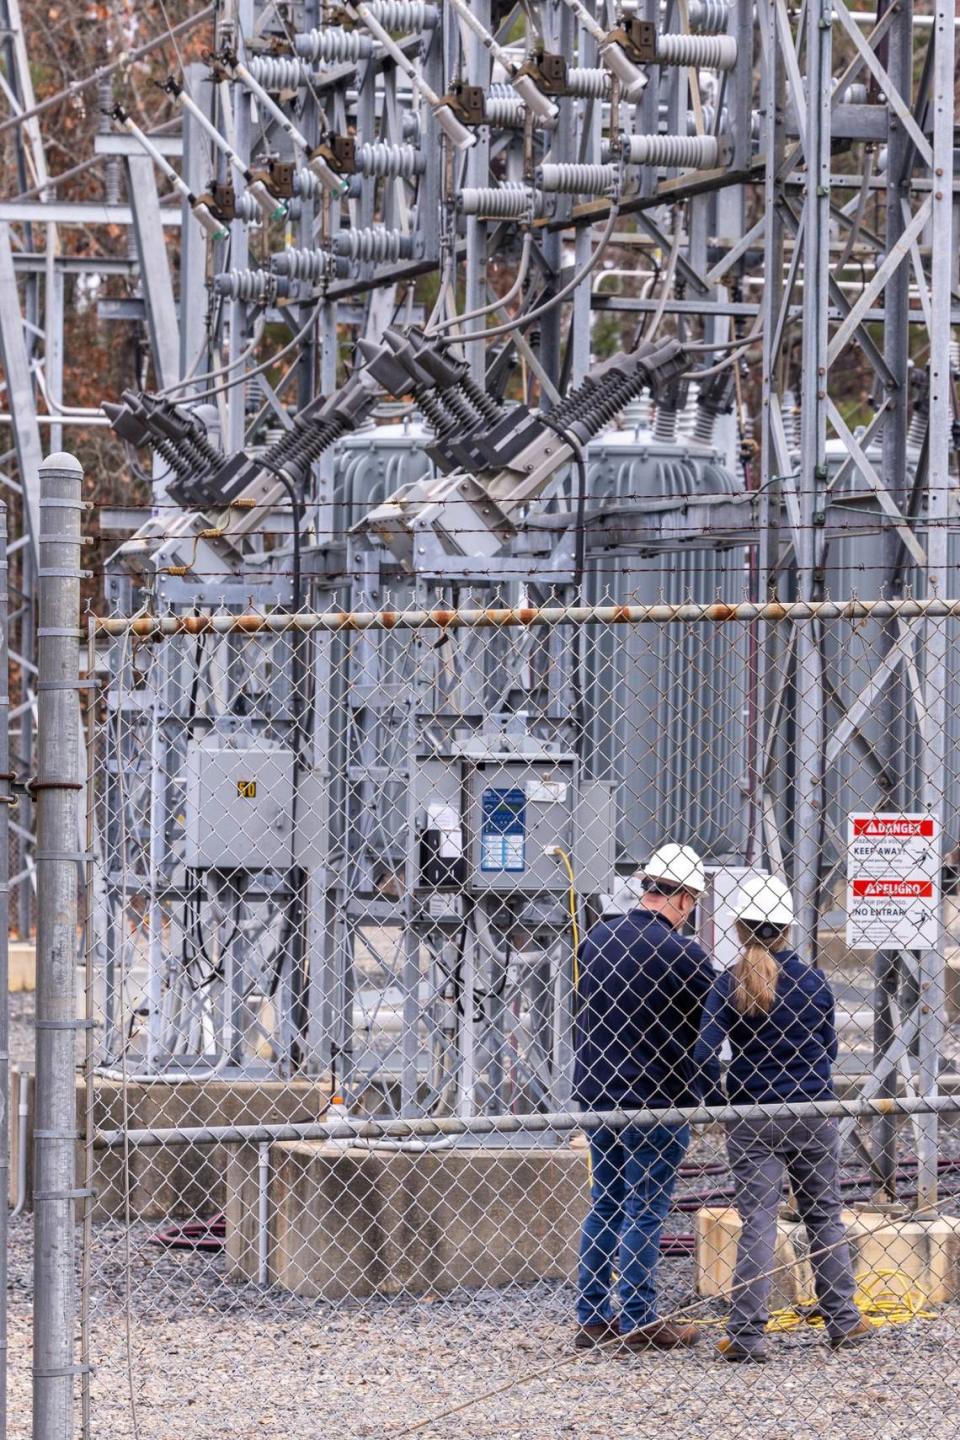 Workers with Randolph Electric Membership Corporation work to repair the Eastwood Substation in West End Tuesday, Dec. 6, 2022. Two deliberate attacks on electrical substations in Moore County Saturday evening caused days-long power outages for tens of thousands of customers.